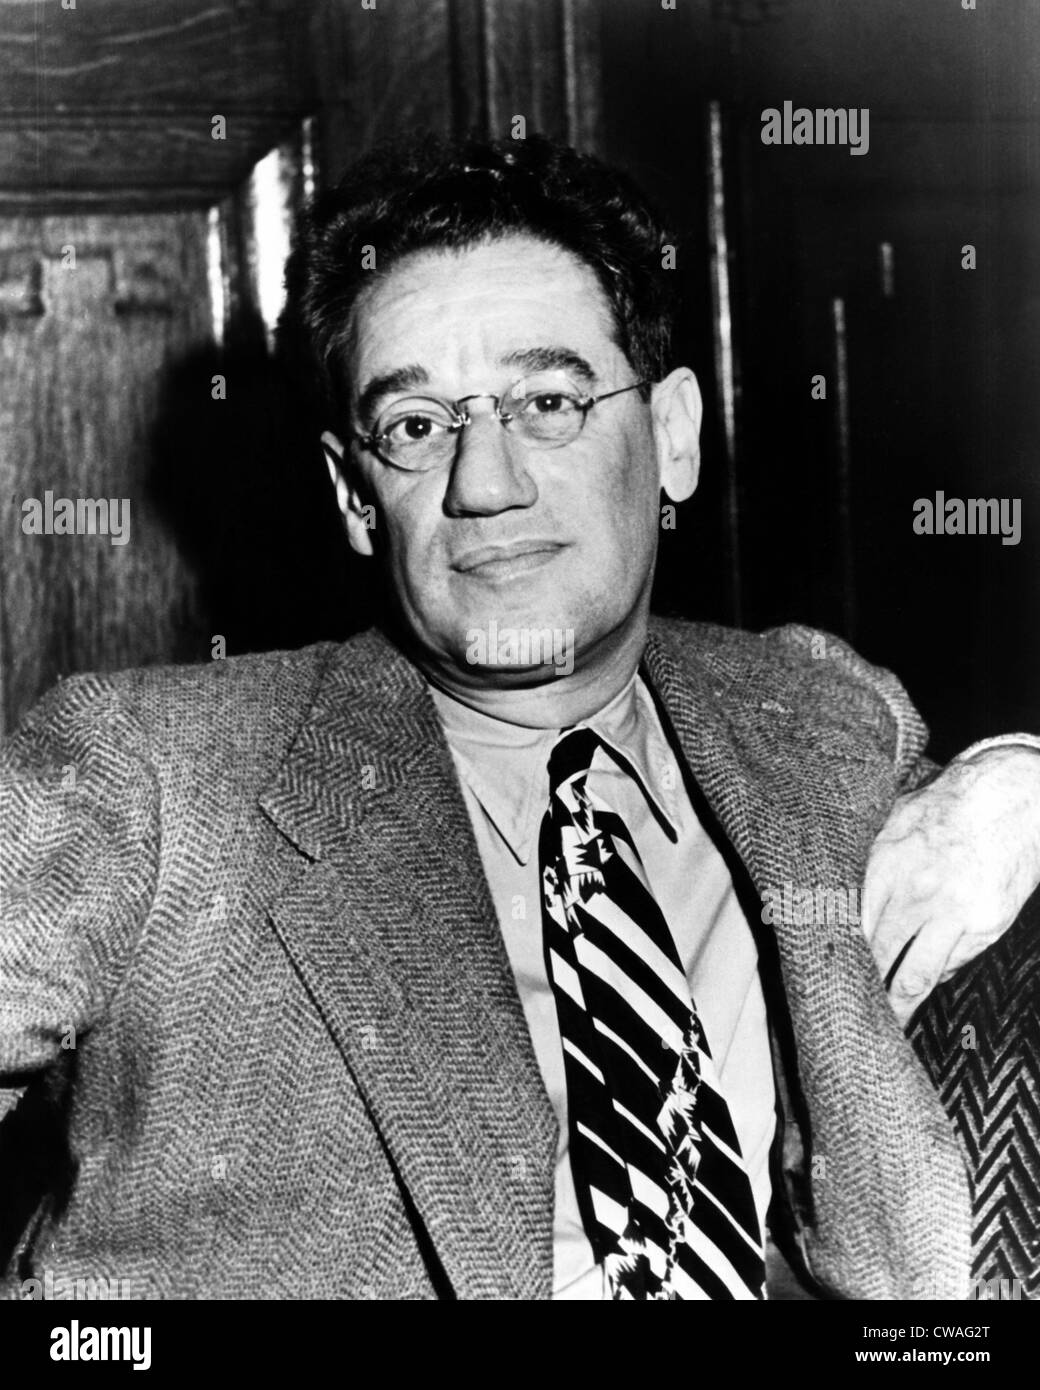 George S. Kaufman, Playwright, 1946. Courtesy: CSU Archives / Everett Collection Stock Photo